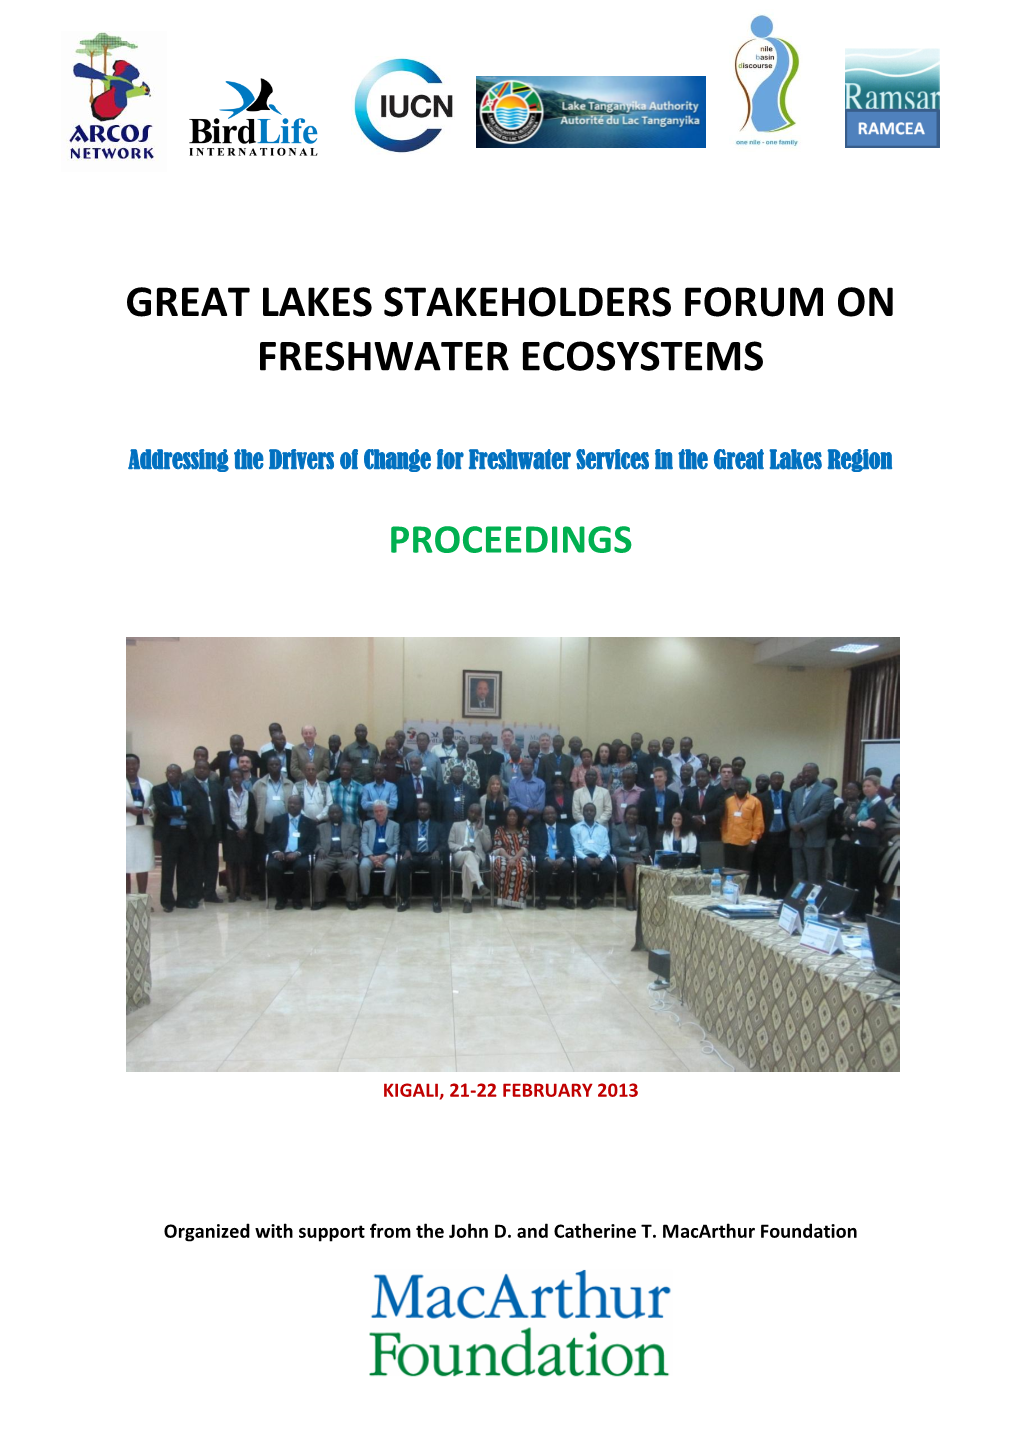 Great Lakes Stakeholders Forum on Freshwater Ecosystems